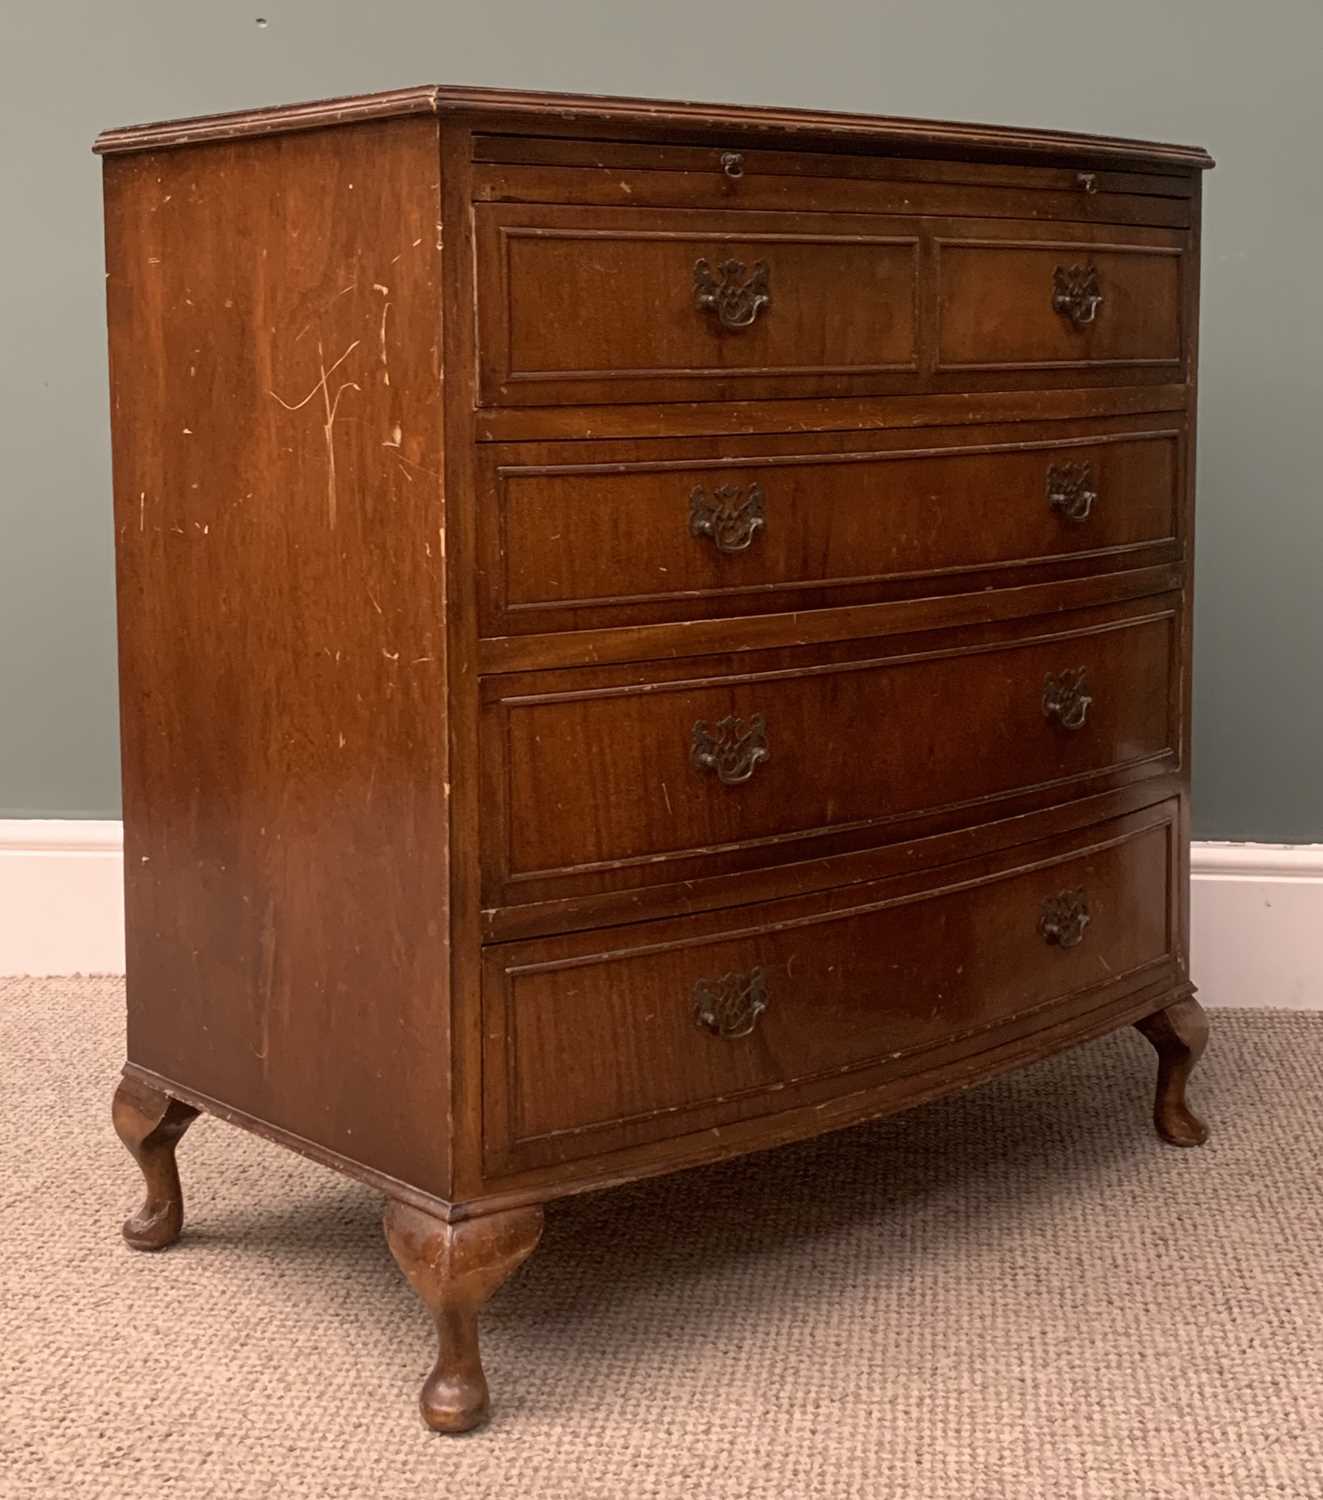 REPRODUCTION MAHOGANY BOW FRONT FOUR DRAWER CHEST, with brush slider, 83 (h) x 77 (w) x 45 (d) cms - Image 3 of 5